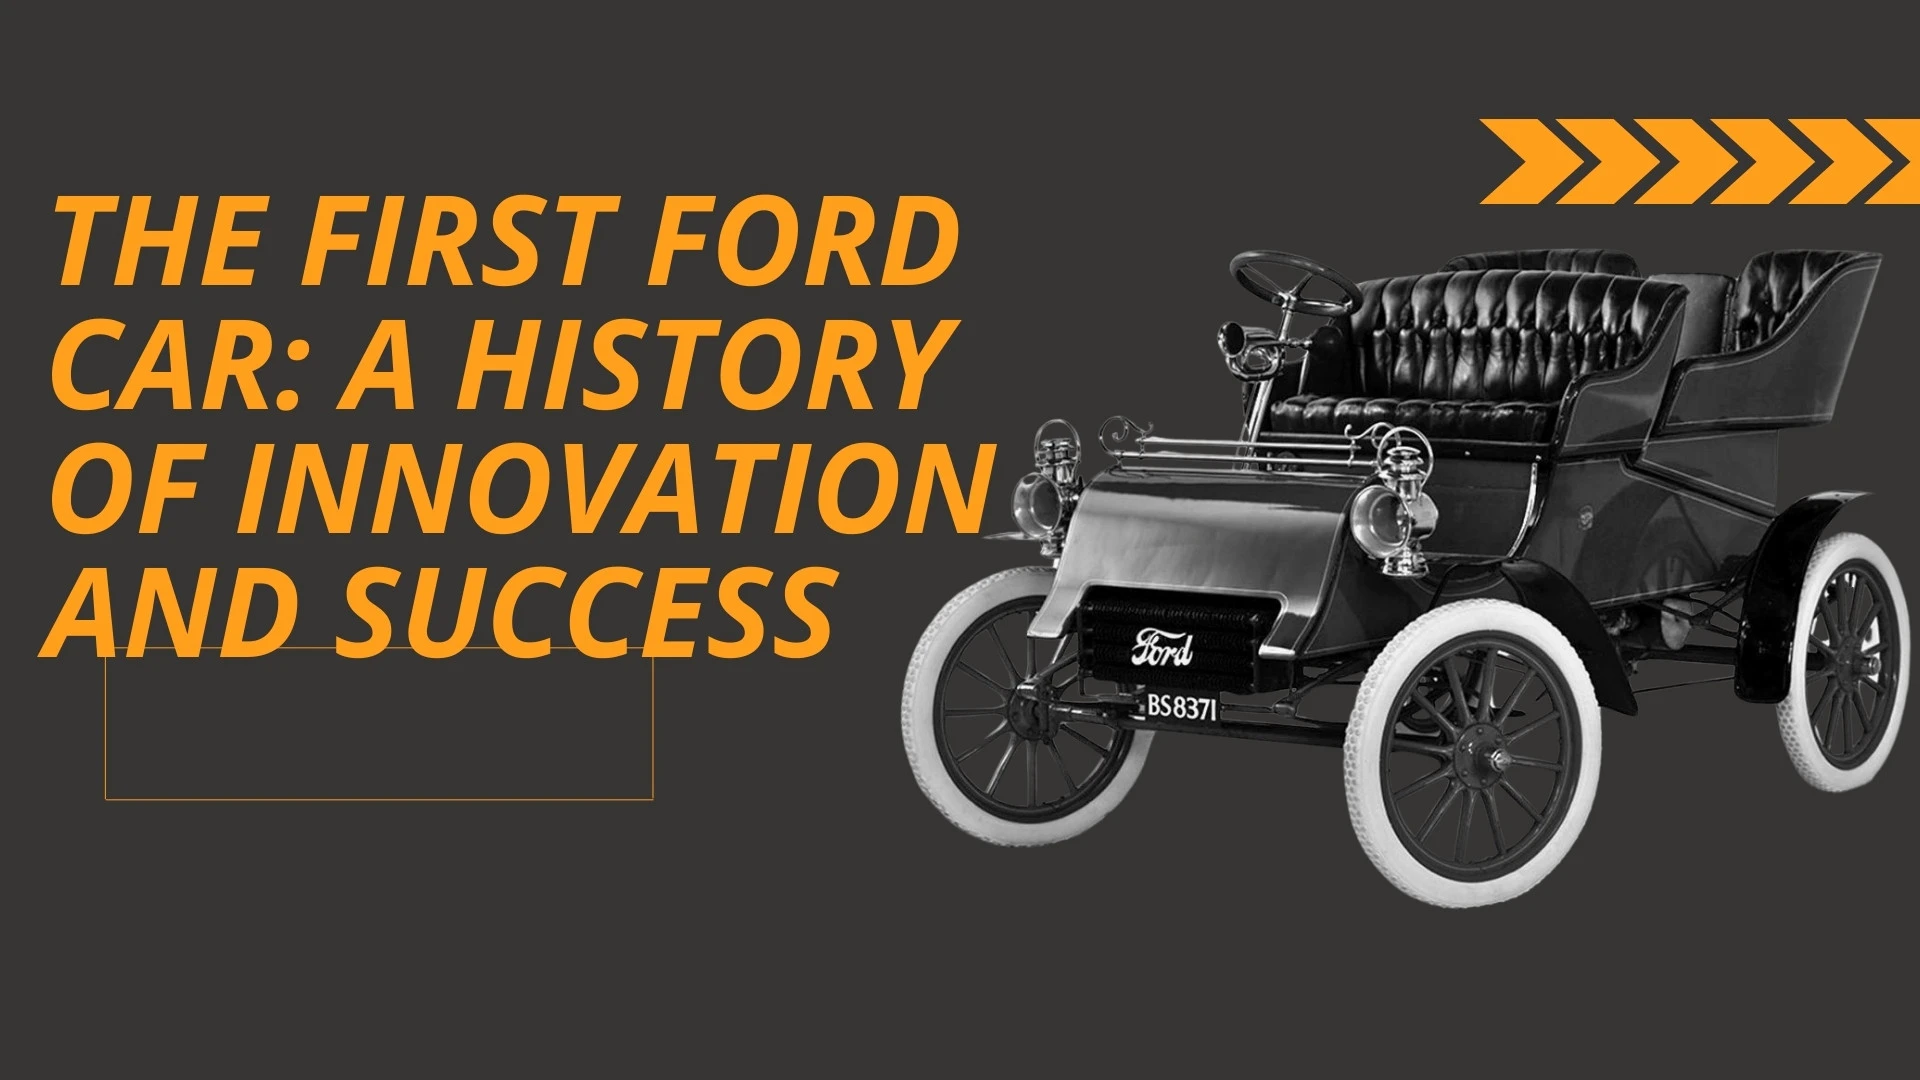 The First Ford Car: A History of Innovation and Success